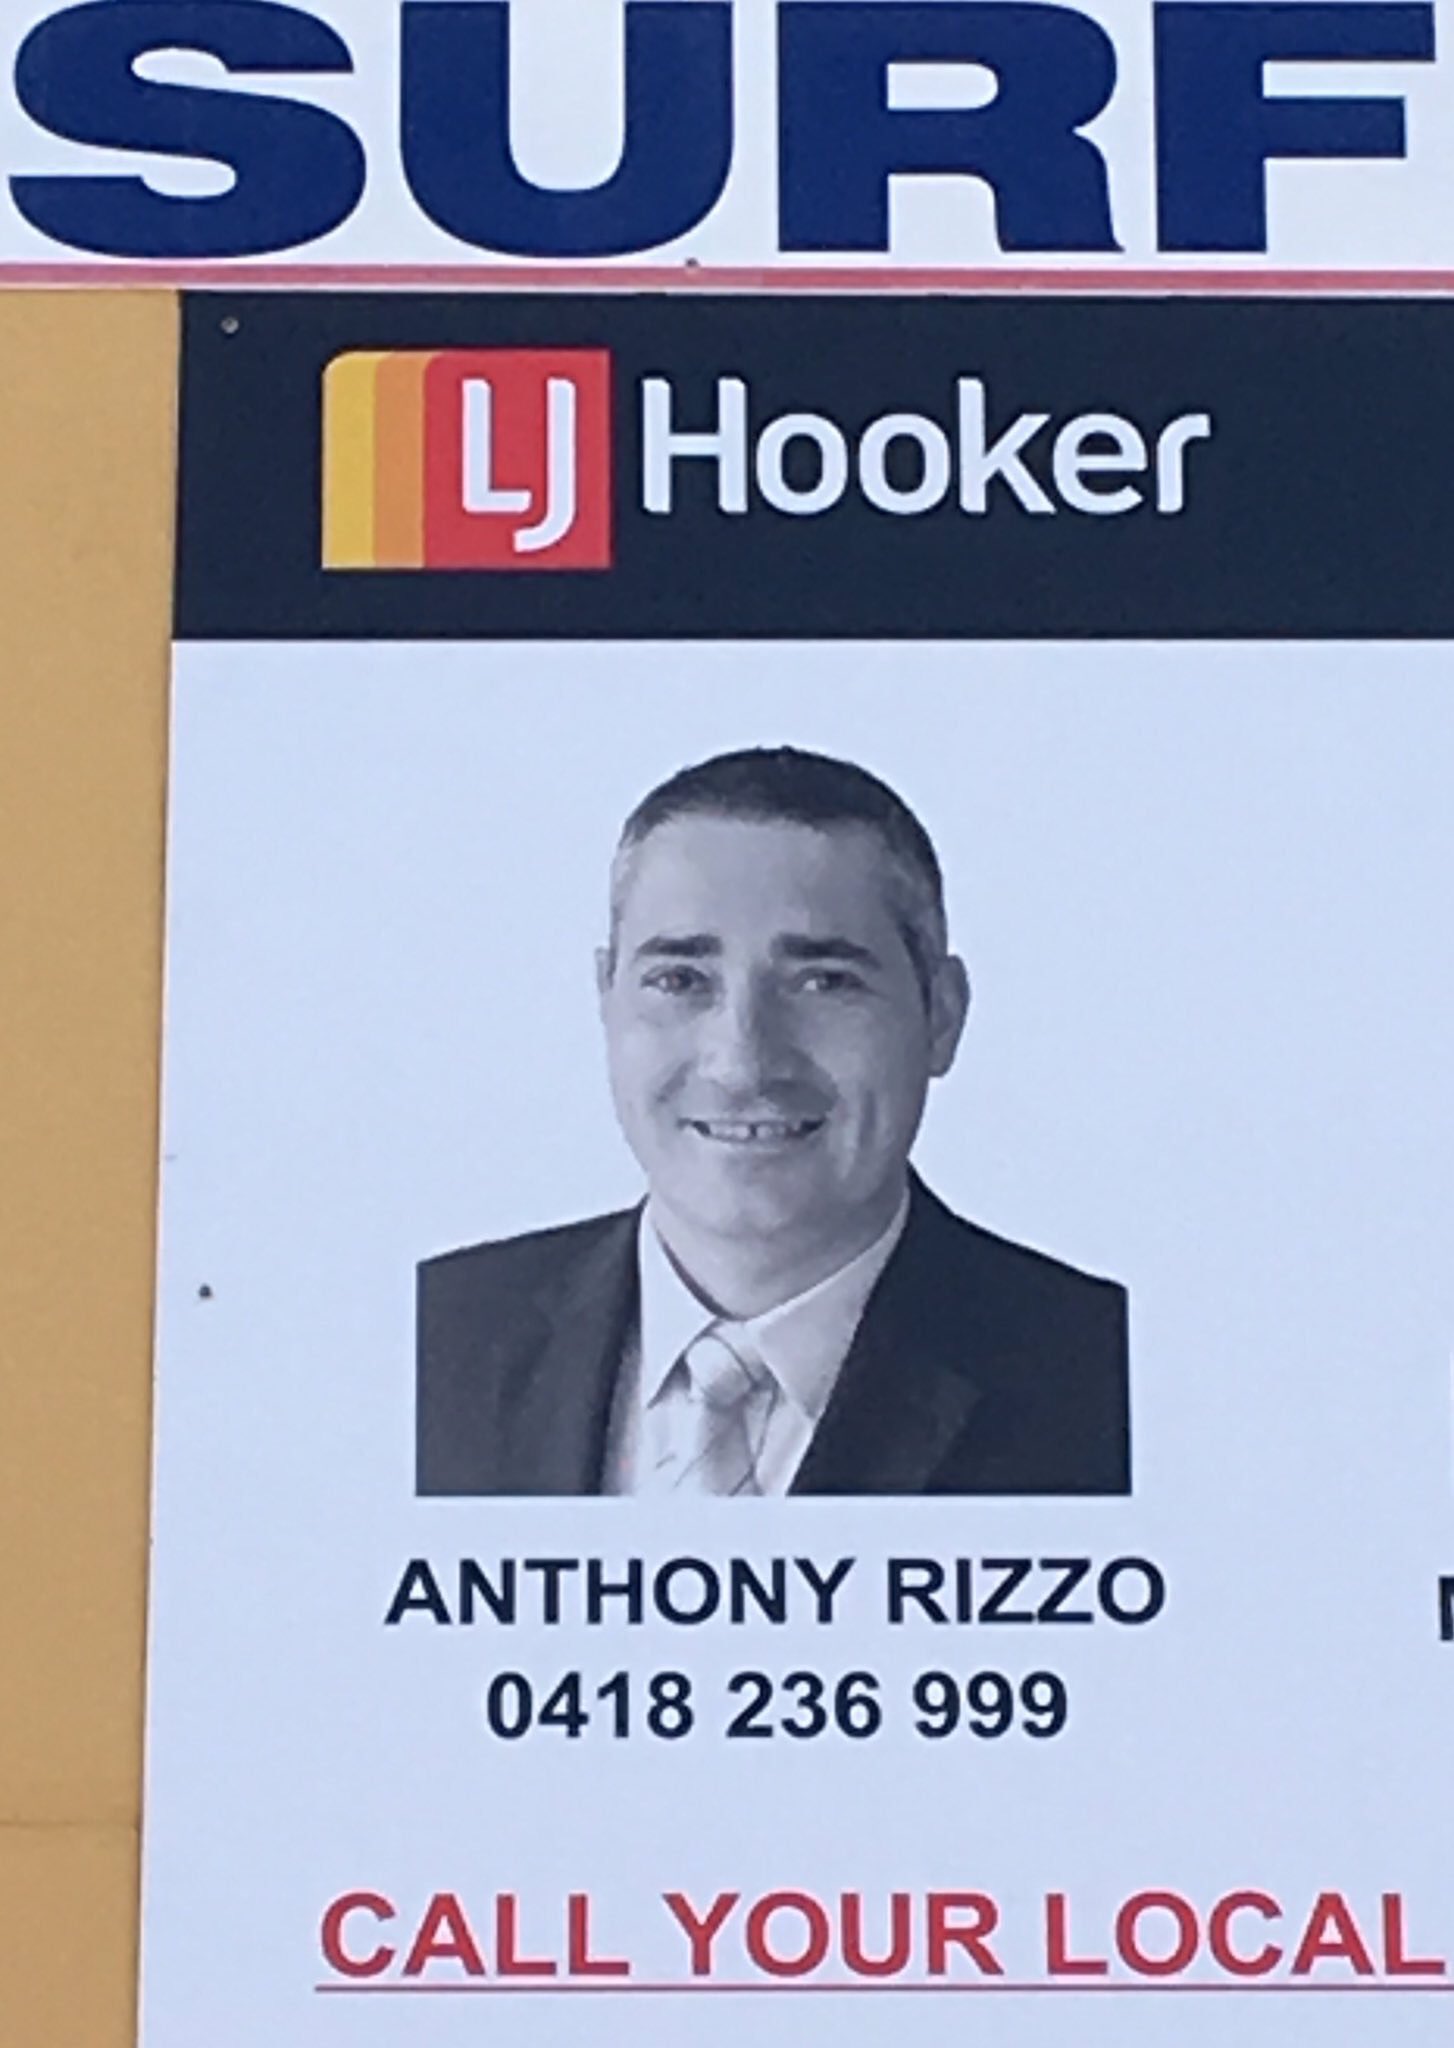 Happy birthday Anthony Rizzo! One of the best real estate agents in Sydney.  